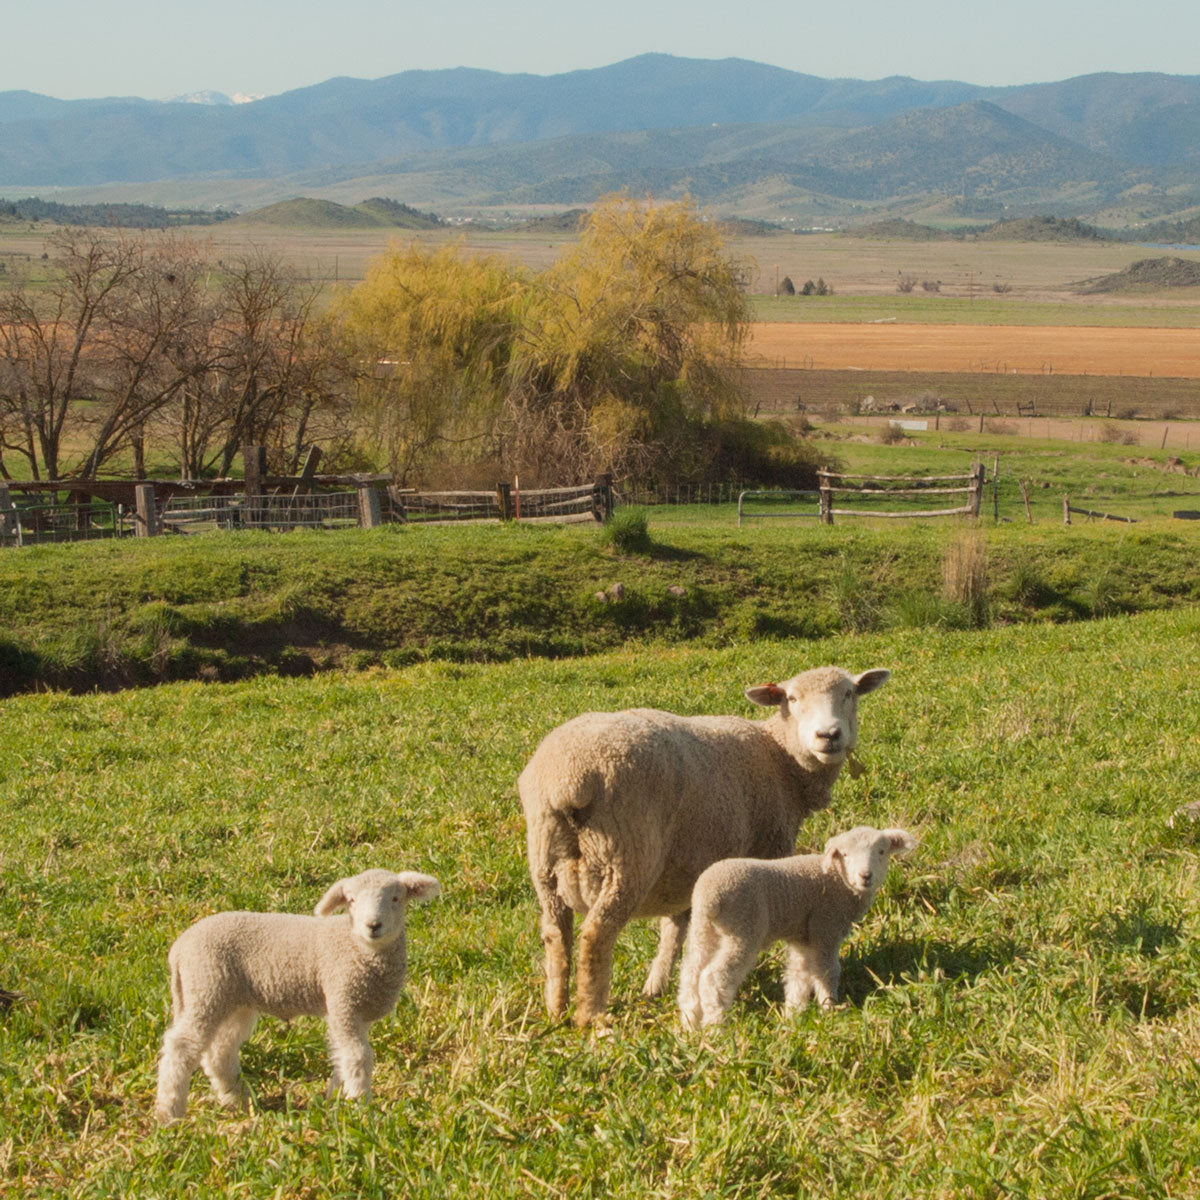 Tawanda Farms sheep on a farm in CA.  A Momma sheep and two little babies in a green field with mountains in the background on a sunny day.